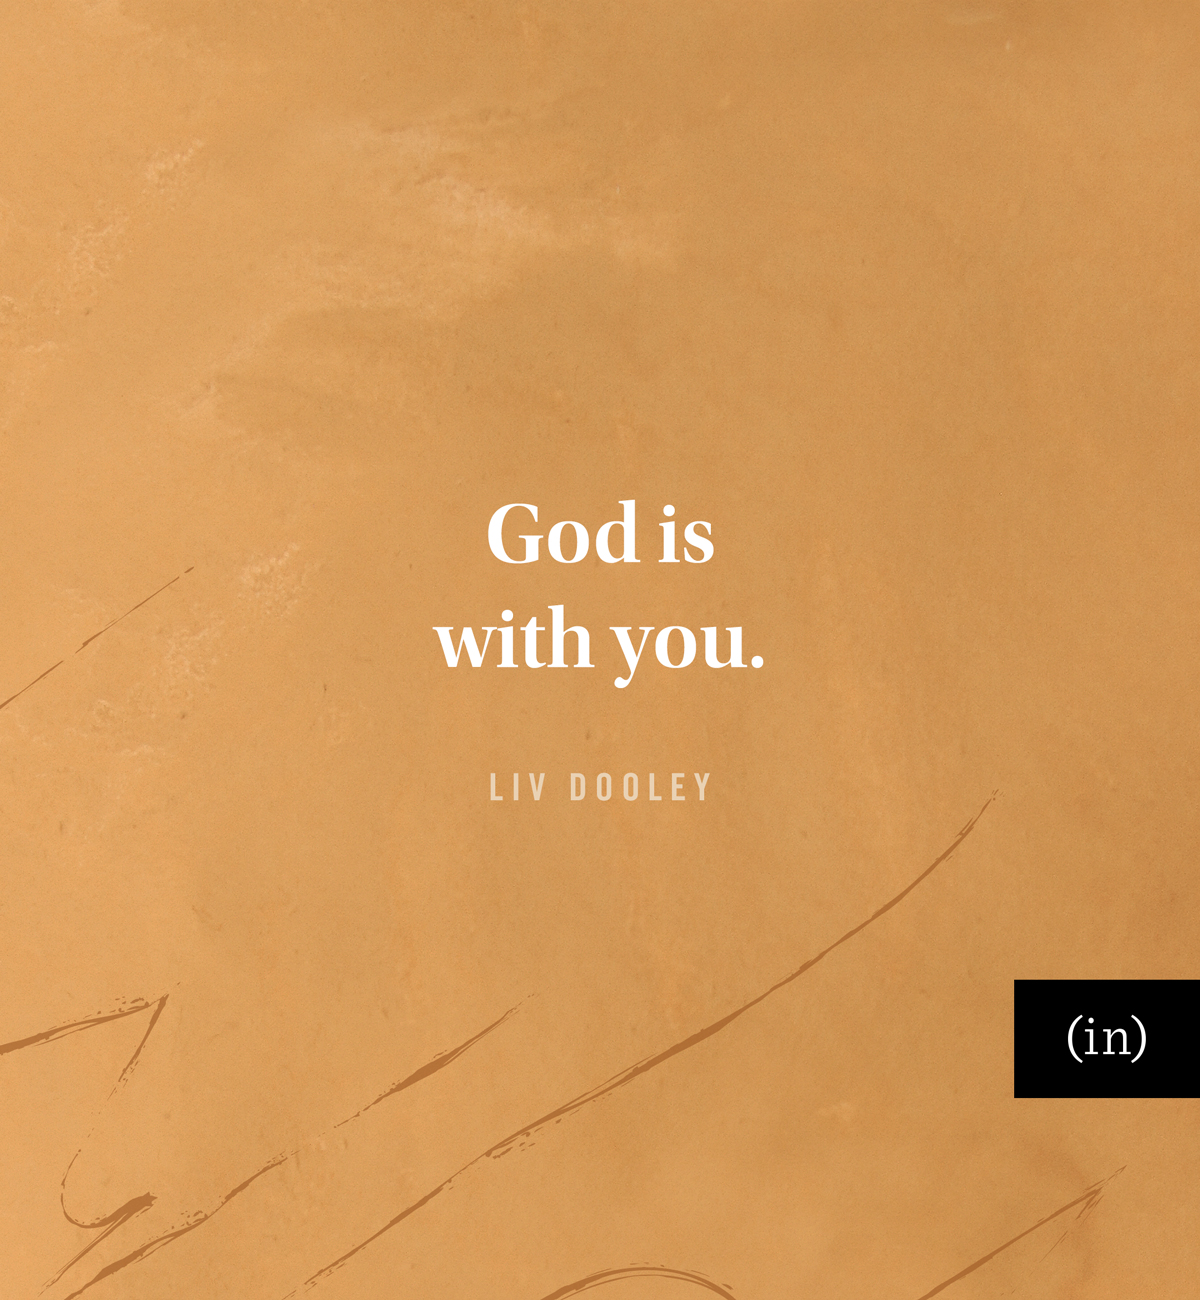 God is with you. -Liv Dooley